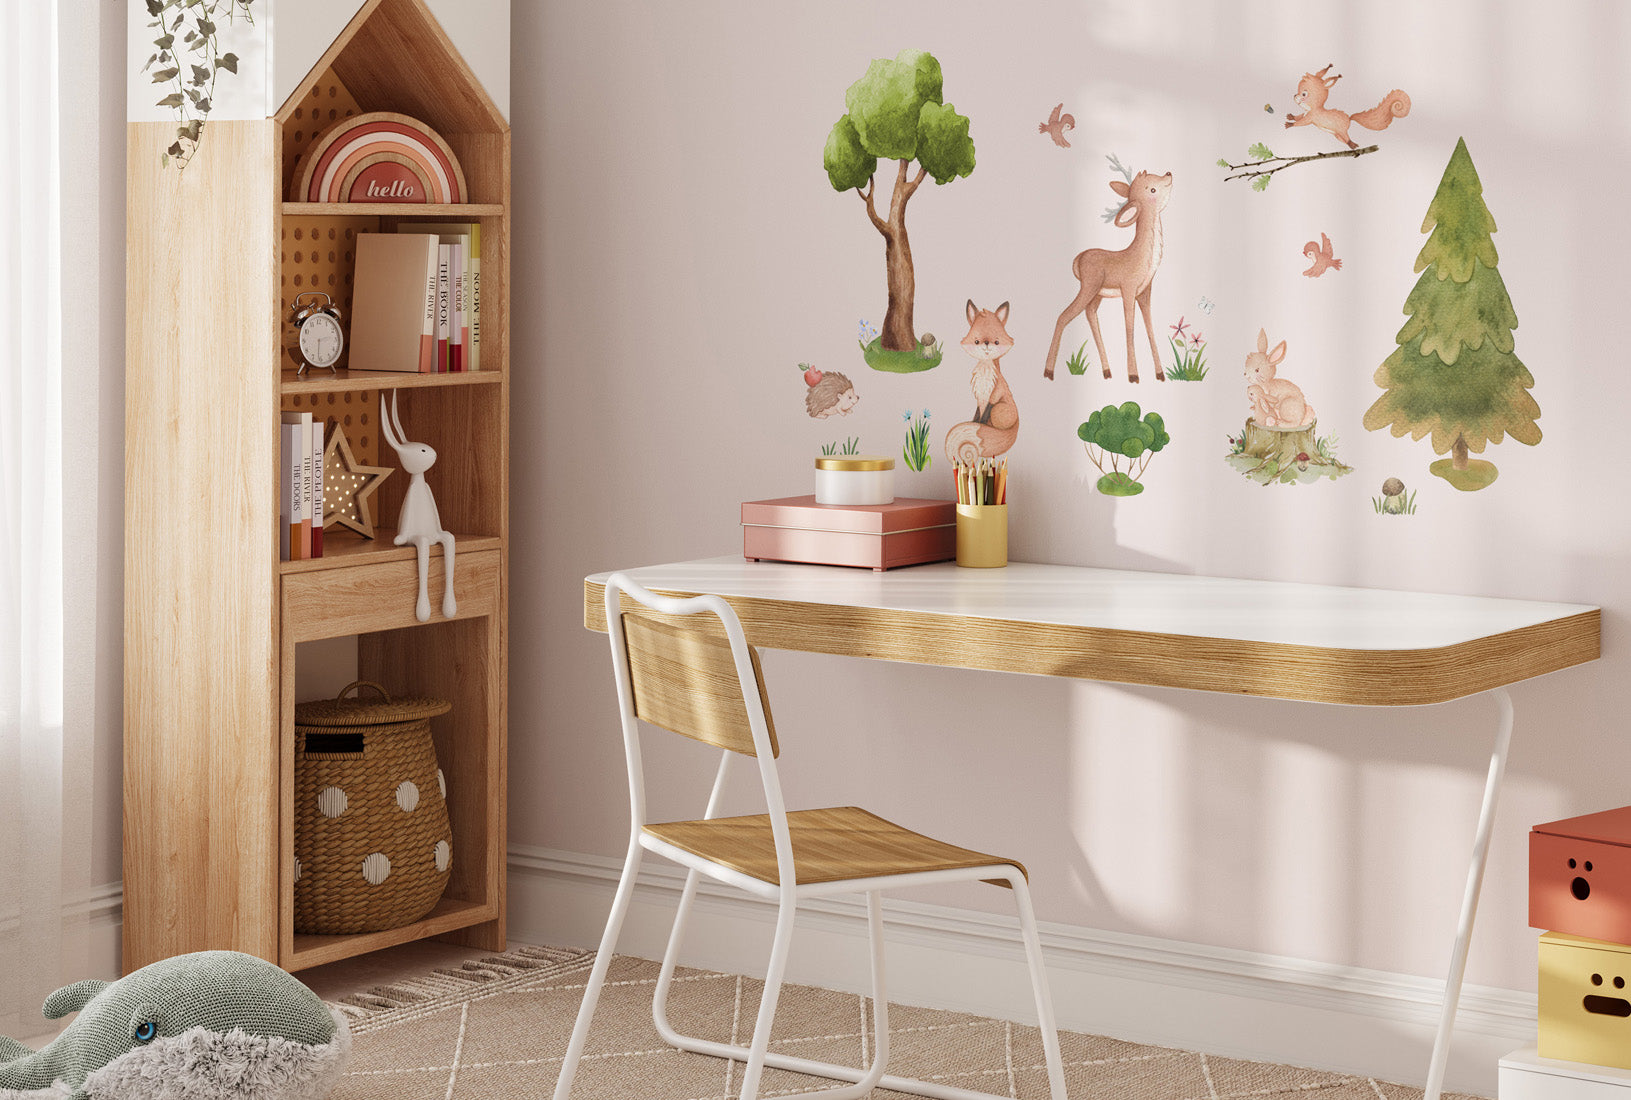 Woodland animals - children's room small wall decals. Bunny, trees, squirrel and fox.